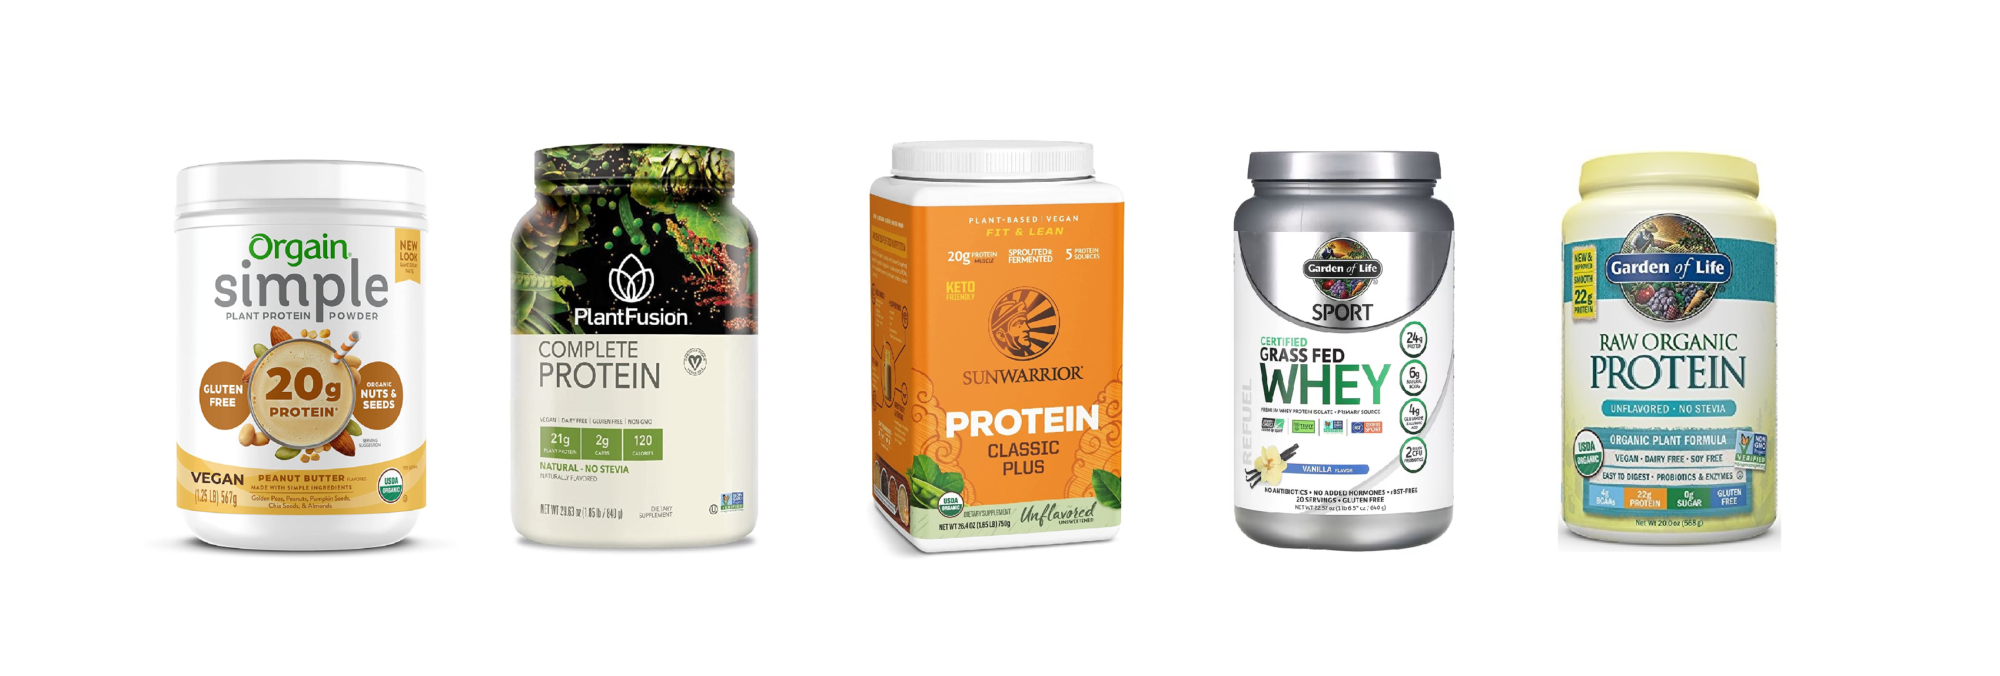 Best-Tasting Stevia-Free Protein Powders Without Stevia